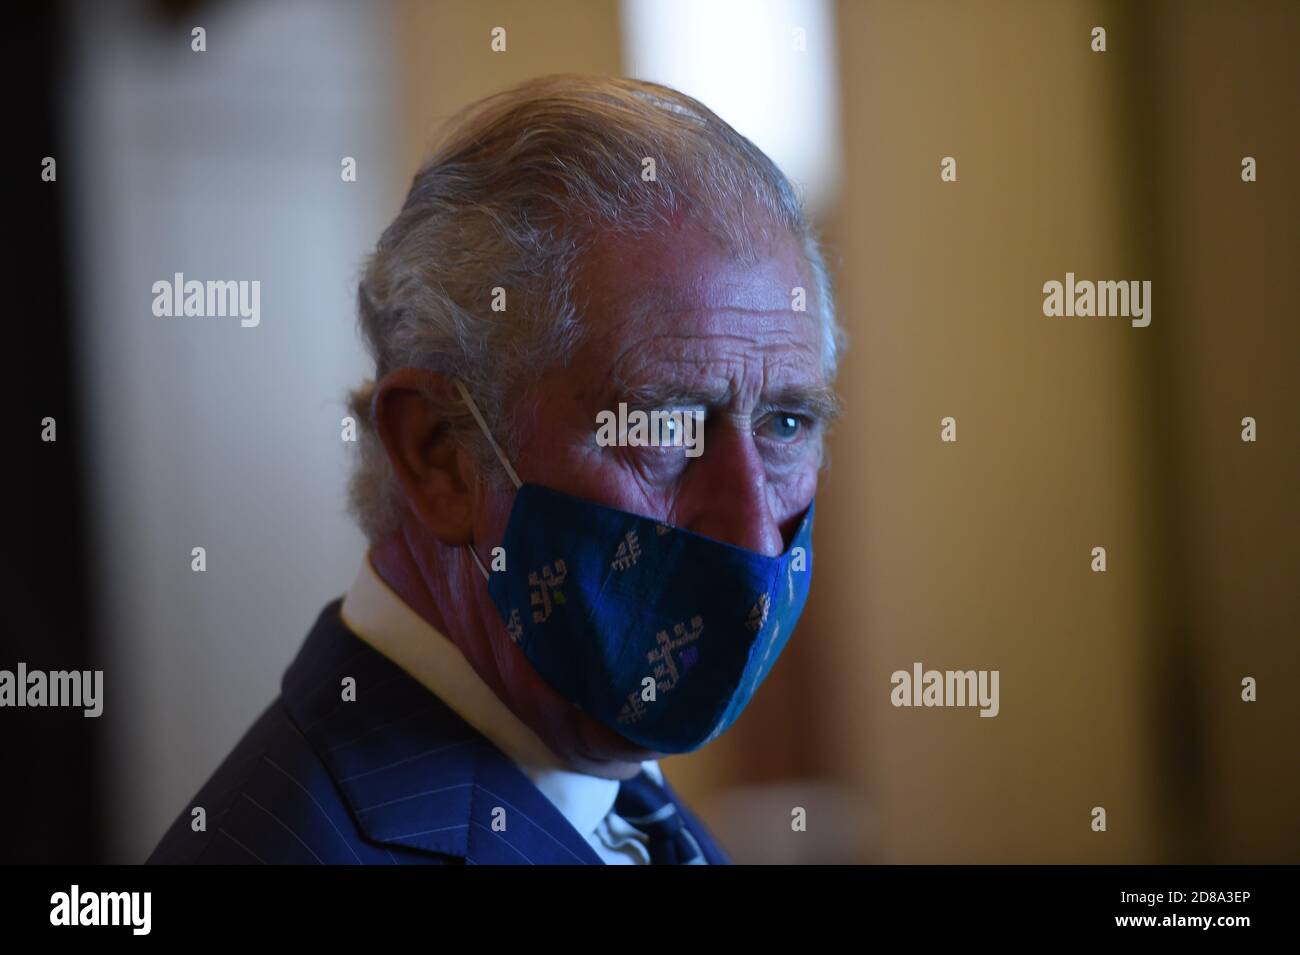 The Prince of Wales during a visit to the headquarters of the Bank of England in the City of London, where he met with Governor Andrew Bailey and reviewed the Bank's role in supporting the national economy through the coronavirus pandemic. Stock Photo